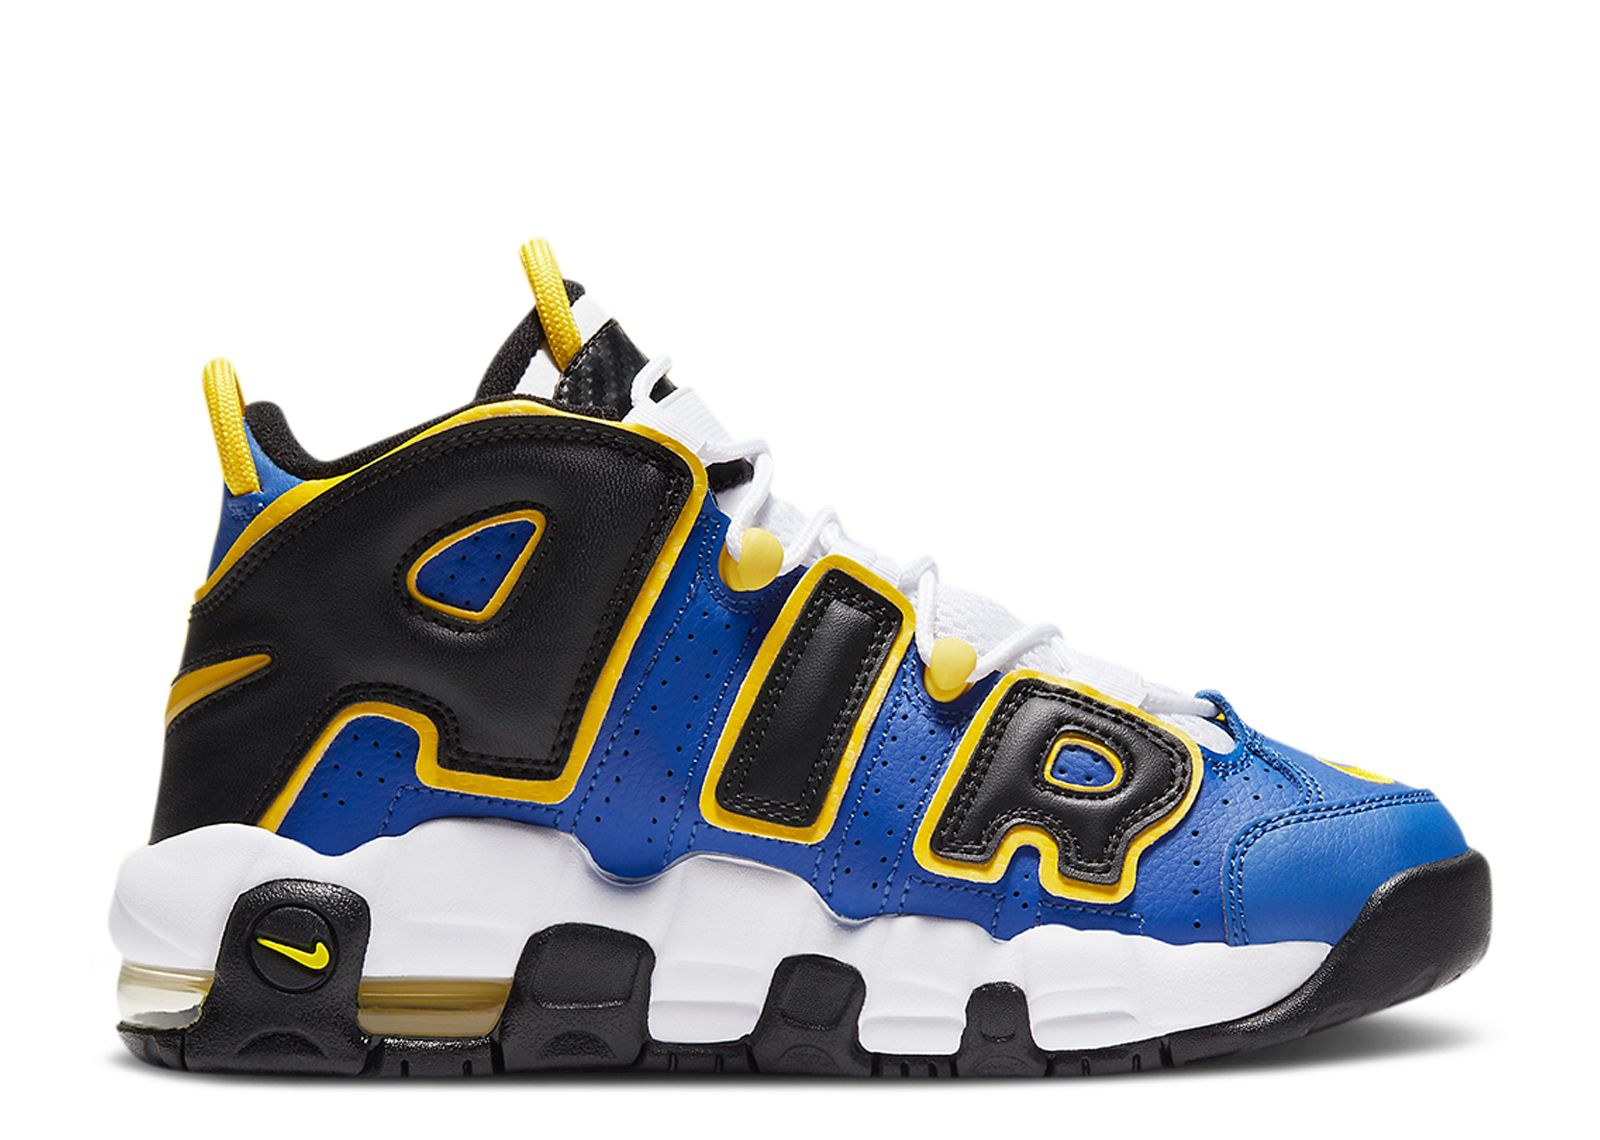 Кроссовки Nike Air More Uptempo Gs 'Peace, Love, And Basketball', синий indoor basketball game shot basketball arcade easy and quick assembling dropshipping